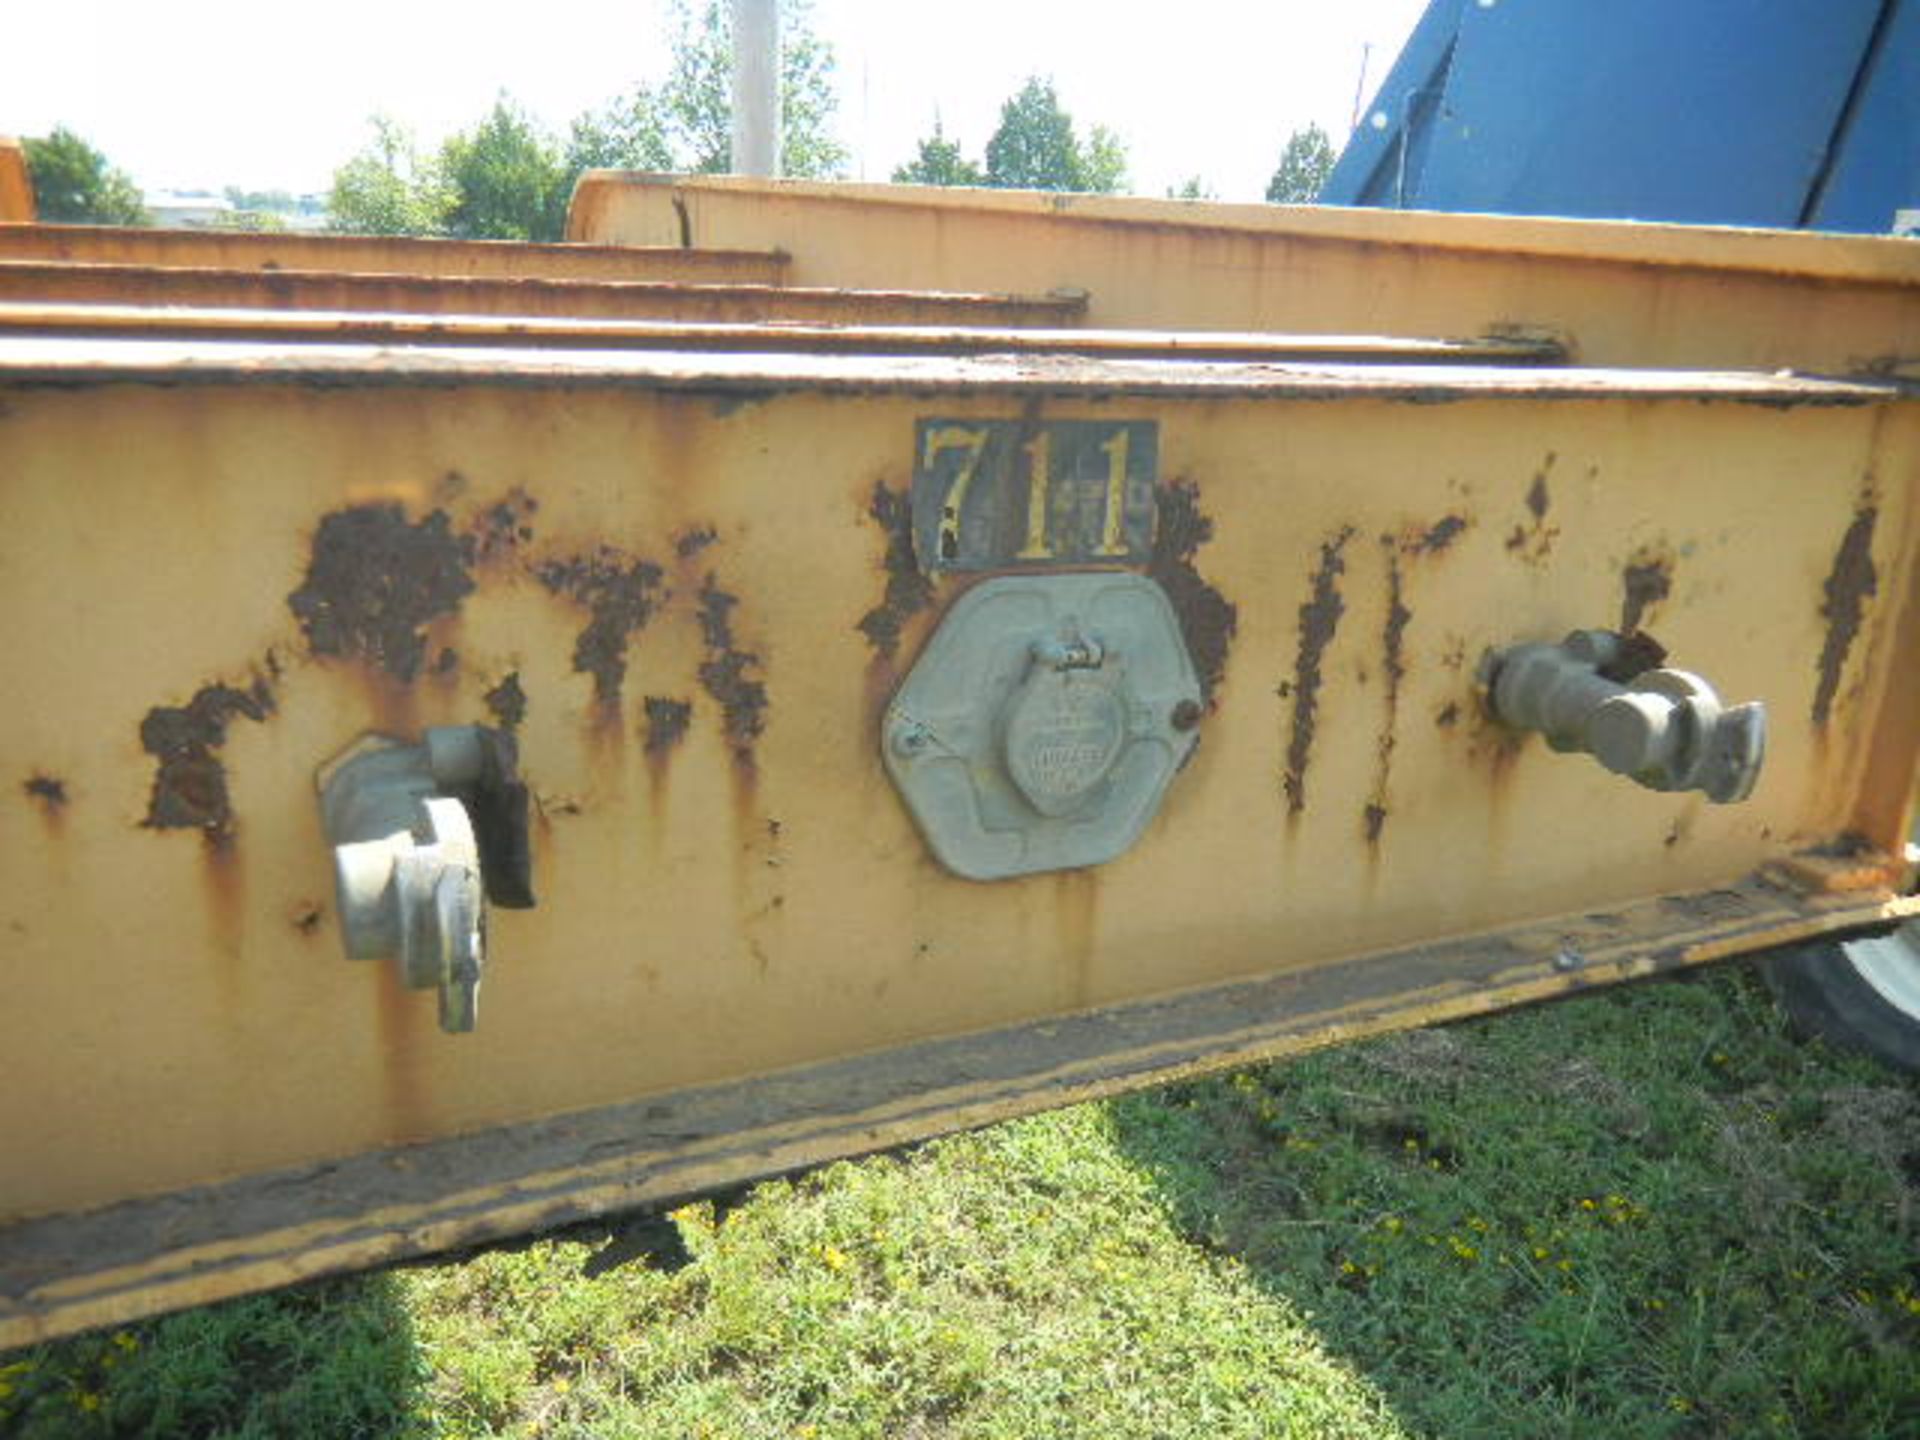 HD 1981 Fontaine Manf. Fifth Wheel Goose Neck Trailer - Needs Board Replaced - Image 9 of 13